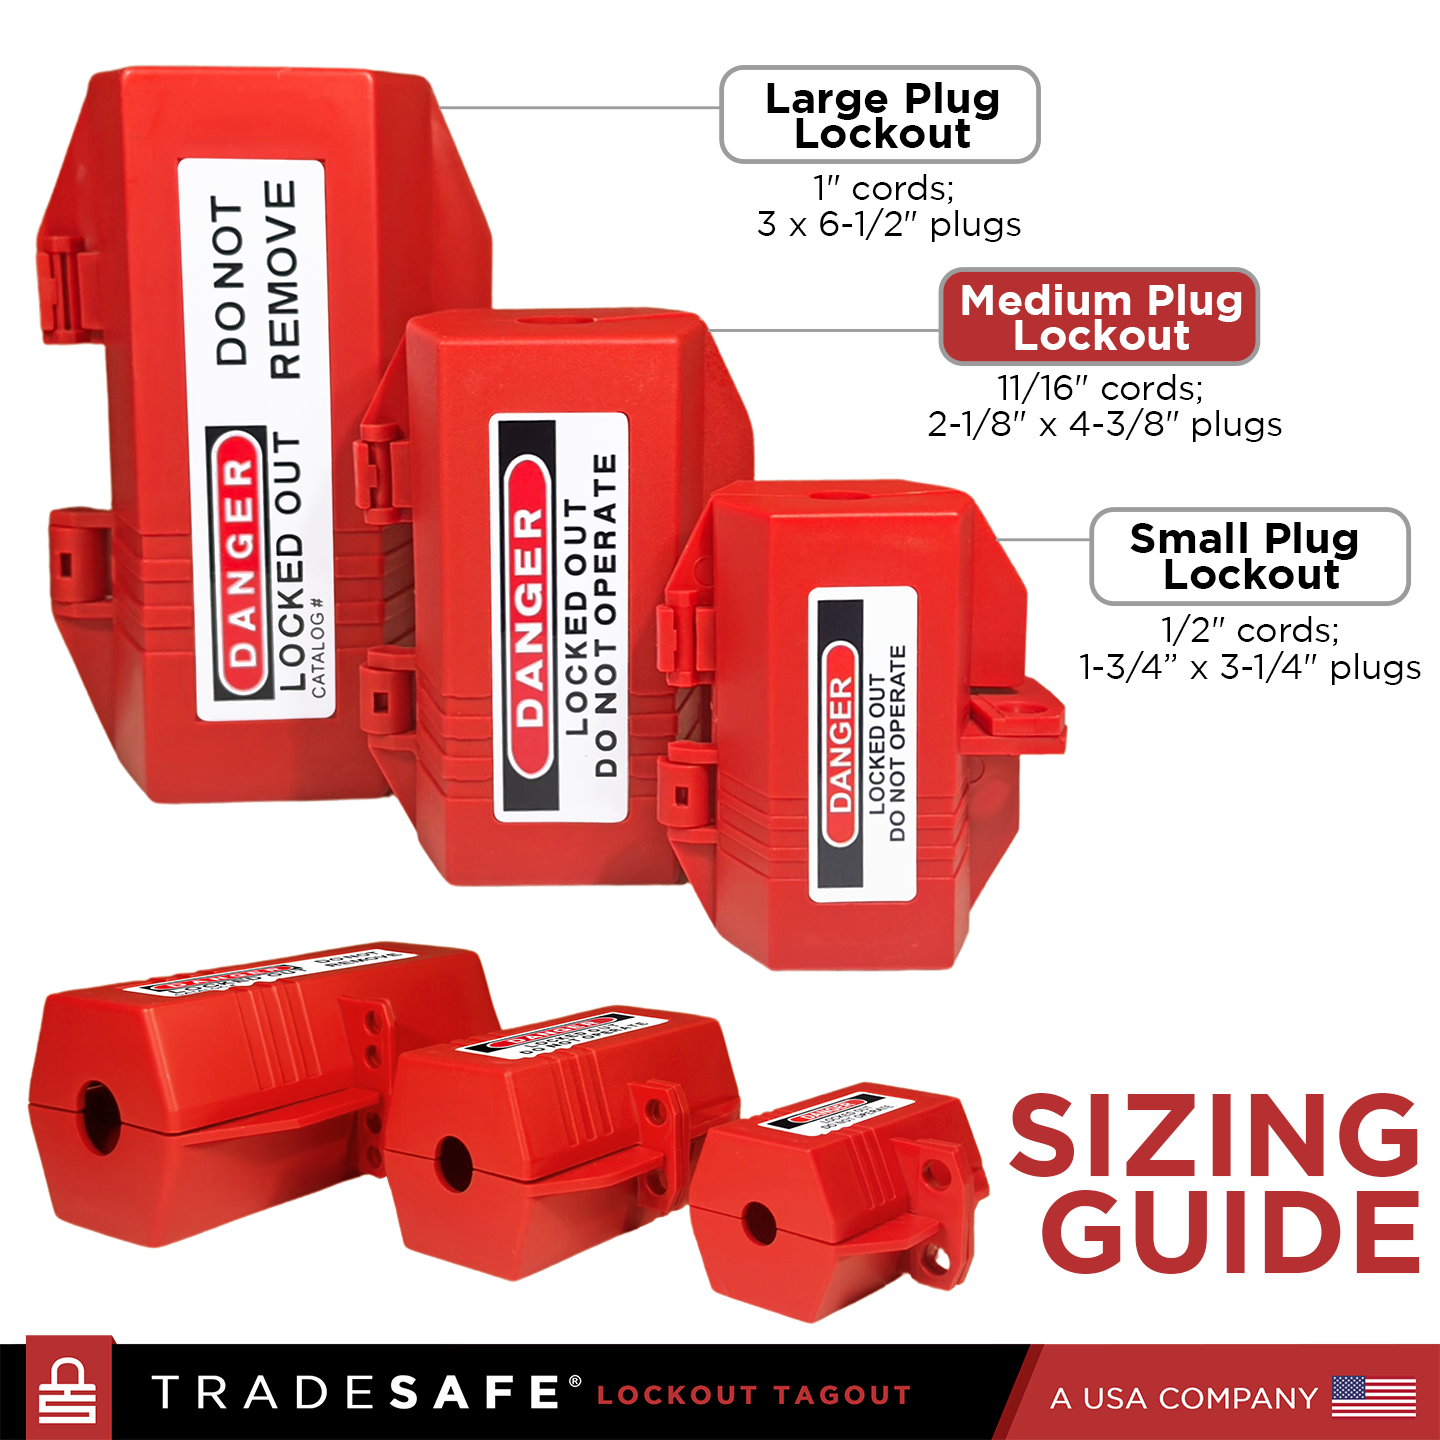 sizing guide of tradesafe electrical plug lockouts in small, medium, large